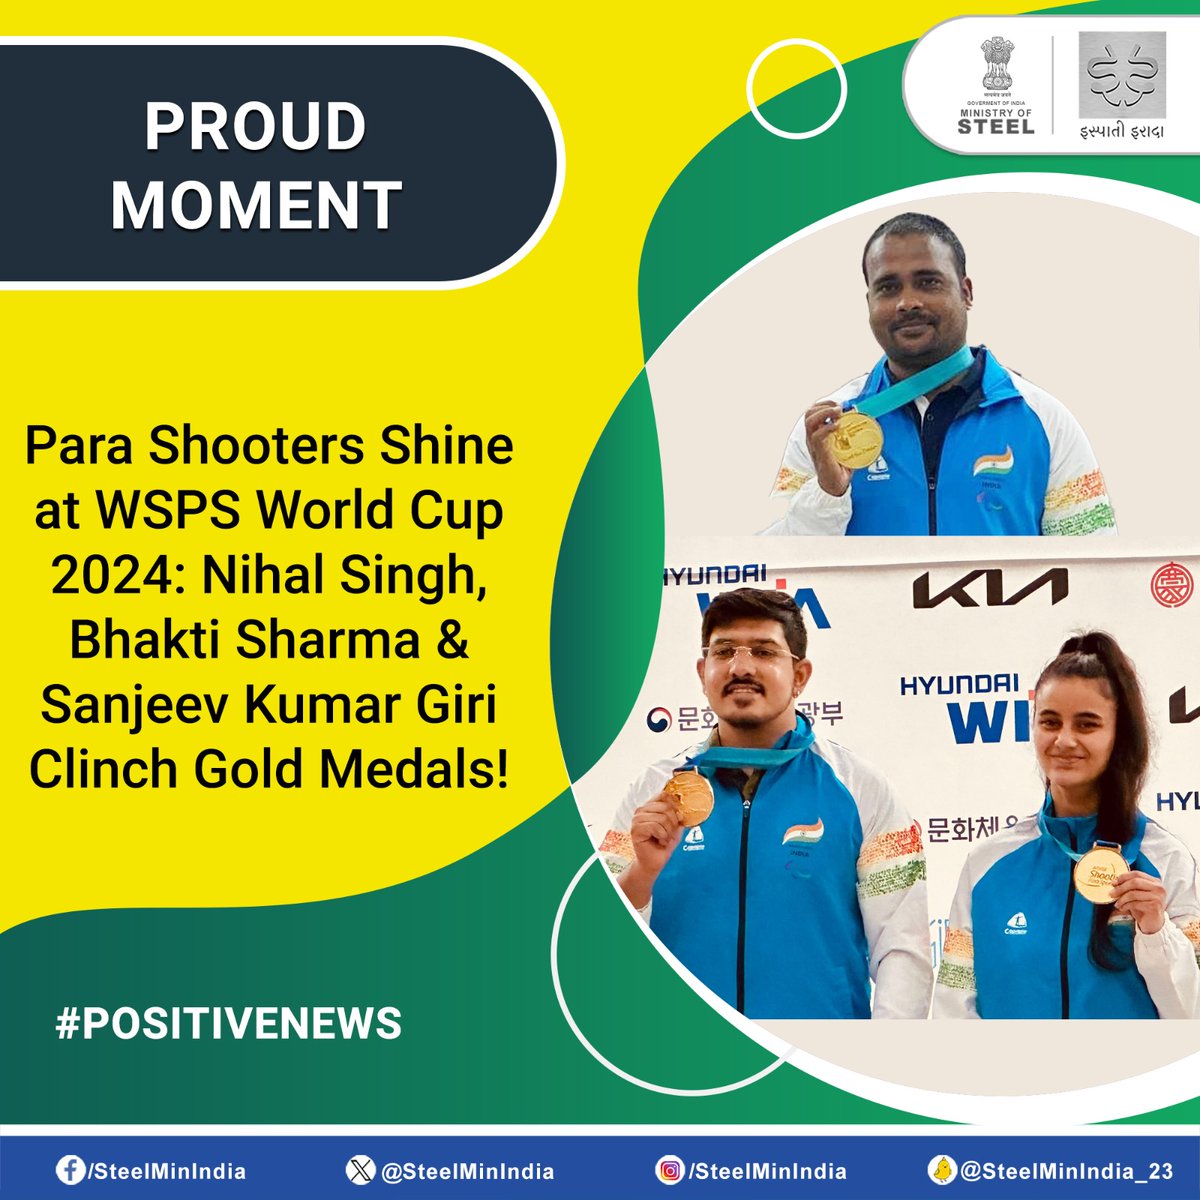 Indian para shooters excel at the #WSPS World Cup 2024 in South Korea. #NihalSingh & #BhaktiSharma won #gold in the Mixed 10m Air Pistol Event, and #SanjeevKumarGiri won #gold in the Men's 10m Air Pistol Category. Congratulations on their impressive victory!🥇🇮🇳 #PositiveNews